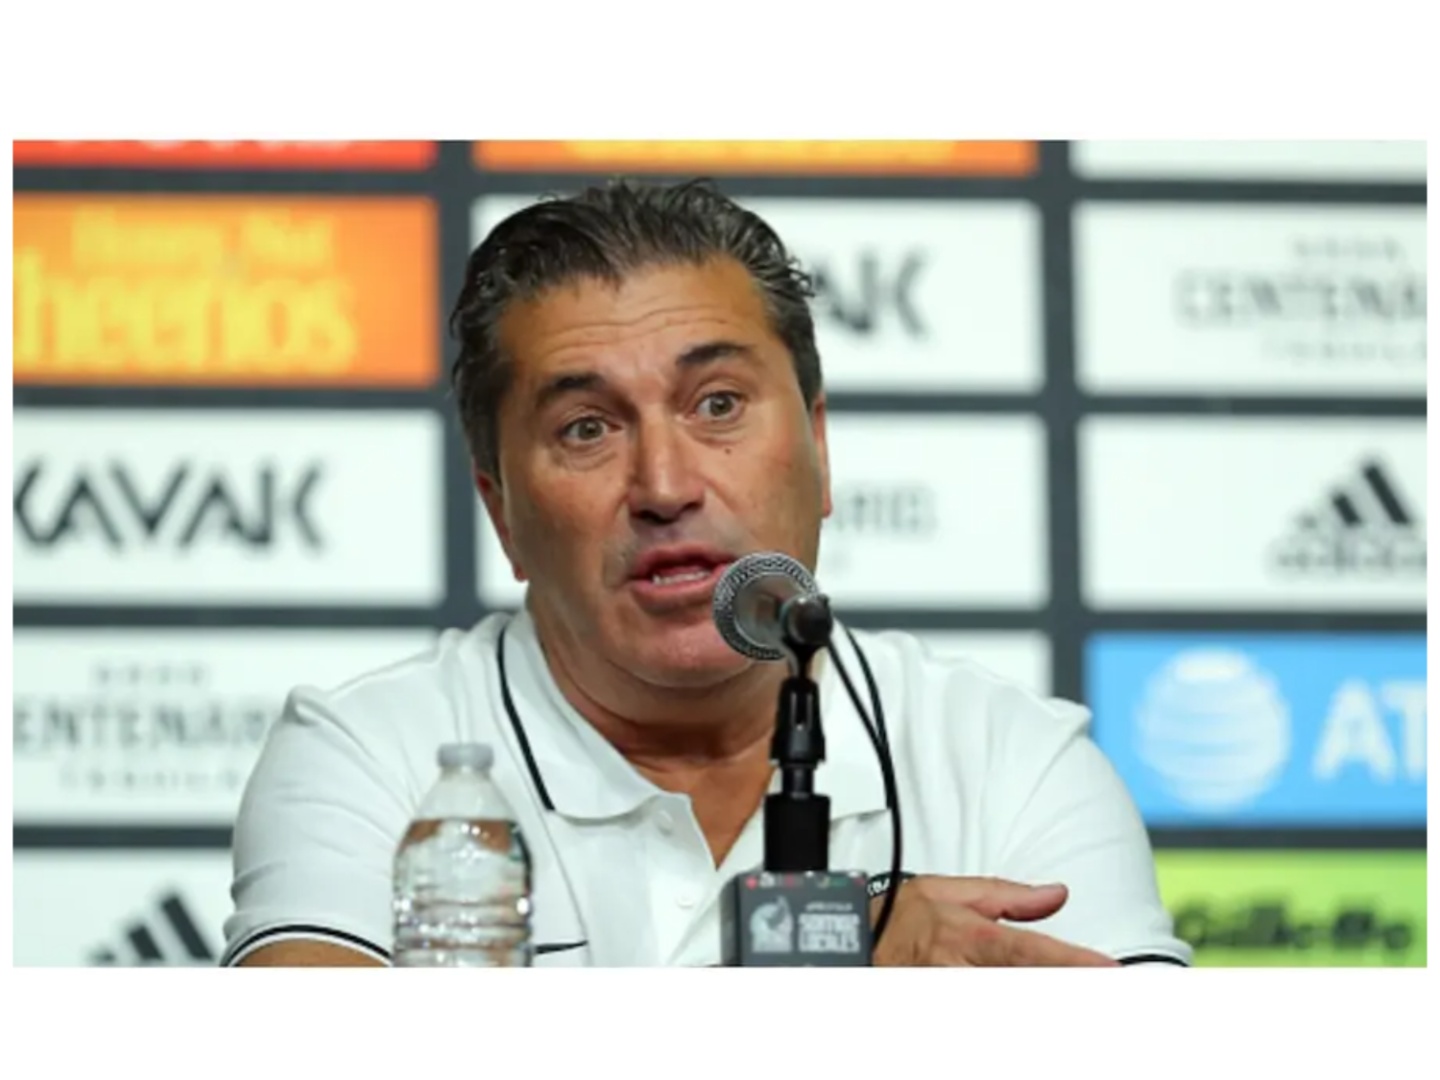 AFCON 2023: Peseiro worried with Super Eagles lack of cutting edge